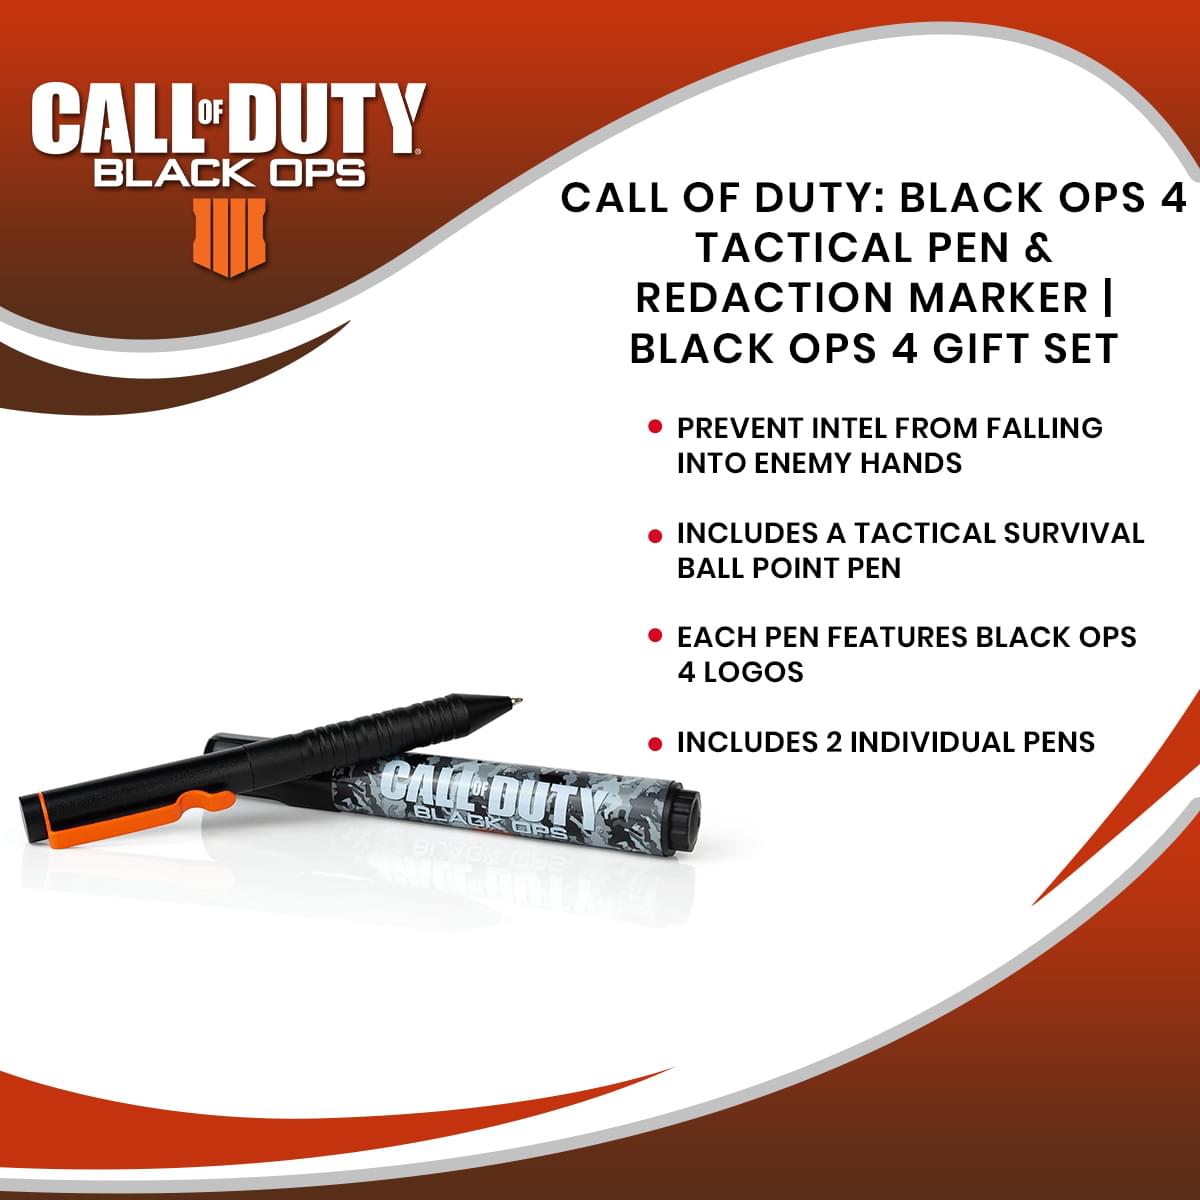 Call of Duty: Black Ops 4 Tactical Pen & Redaction Marker | Black Ops 4 Gift Set